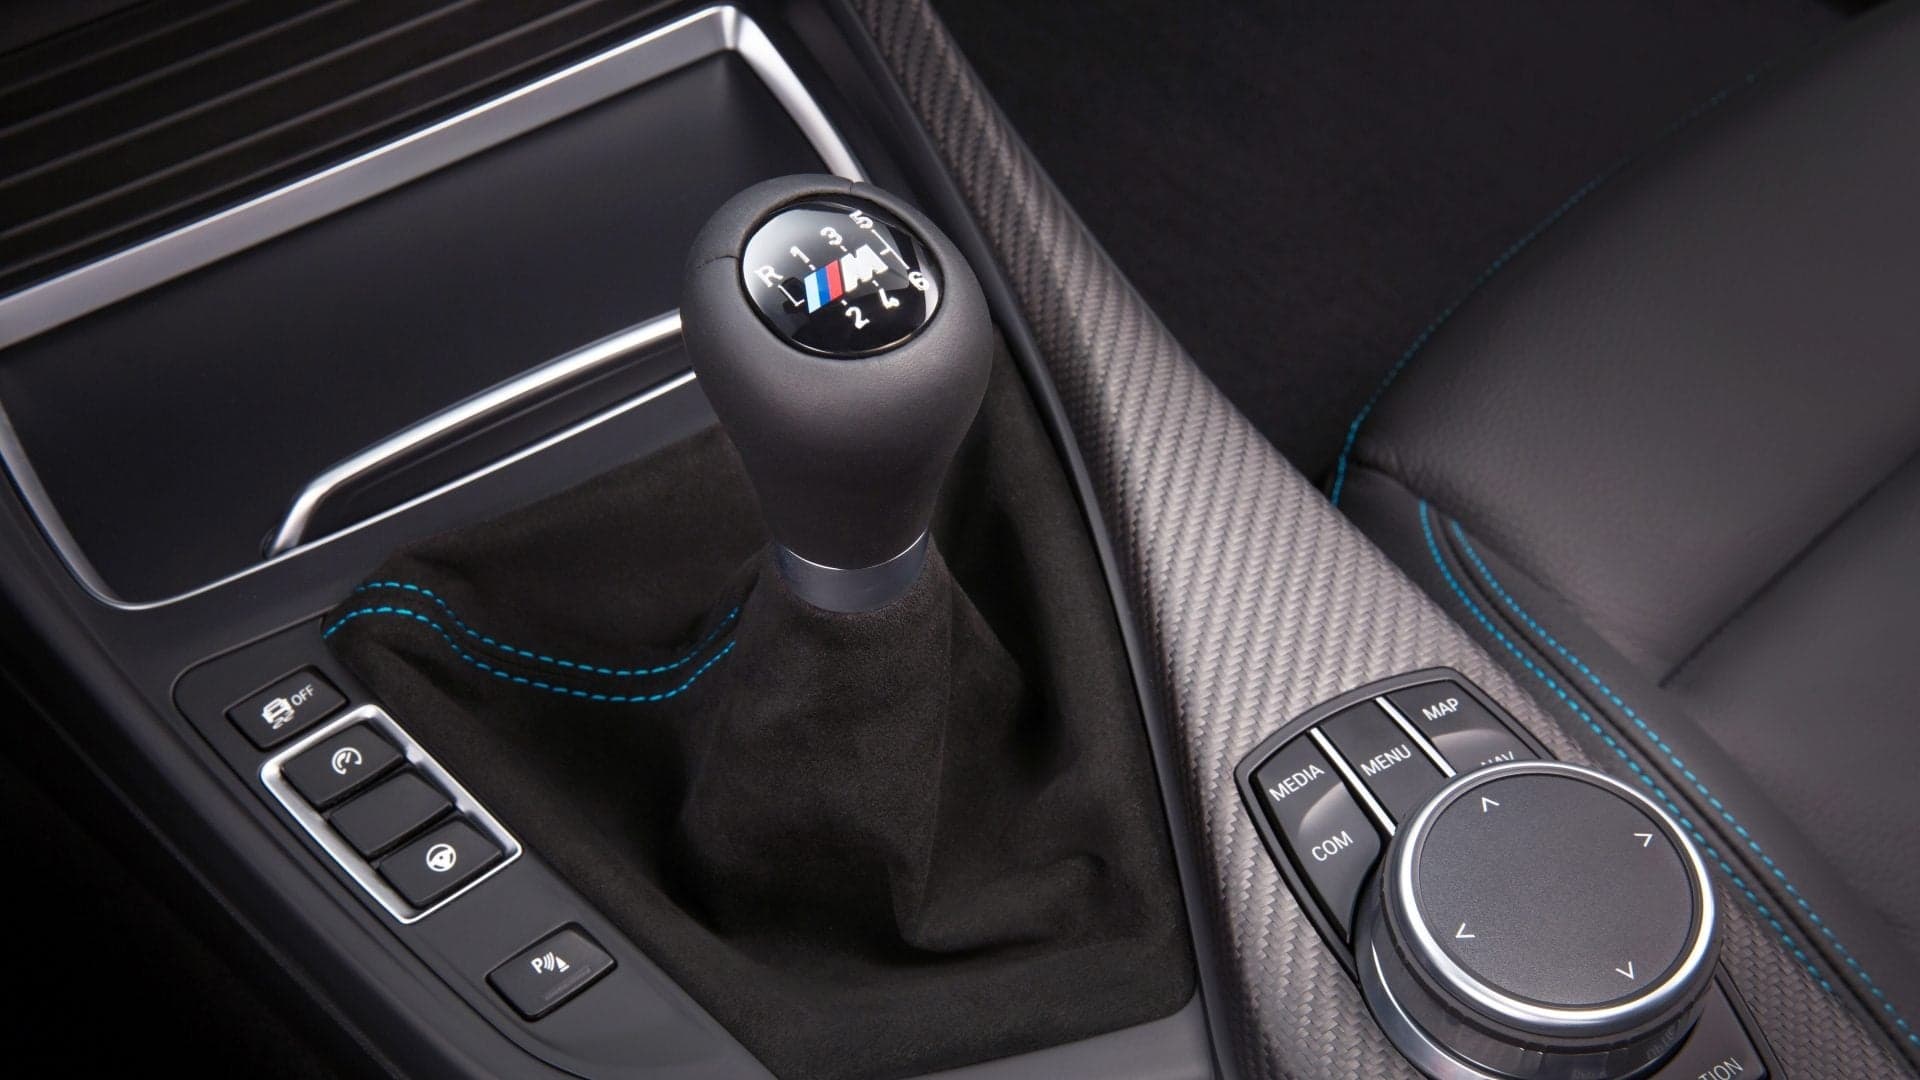 Electric Vehicles Outsold Cars With Manual Transmissions in 2019